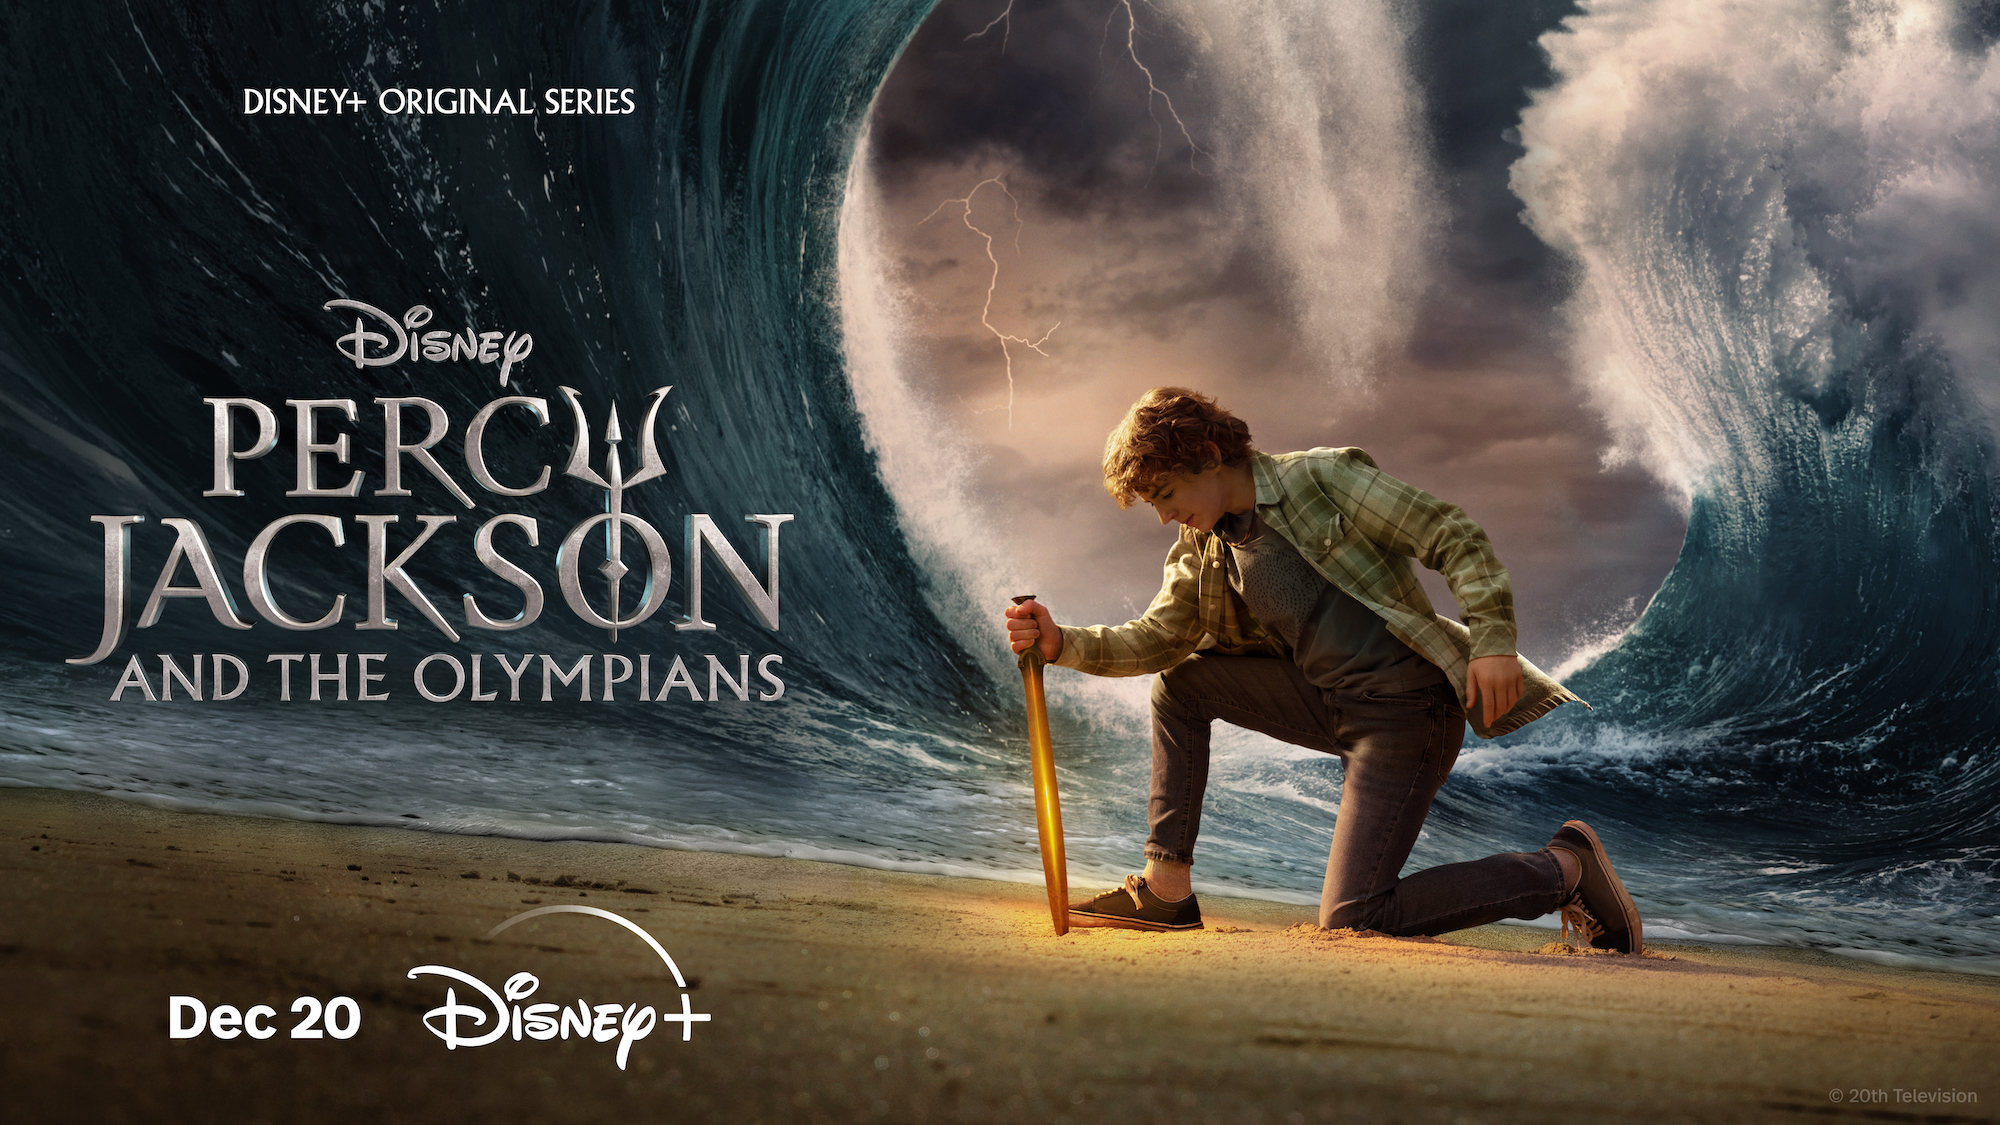 Trailer For ‘Percy Jackson and the Olympians’ Series Sets Up A Epic Journey